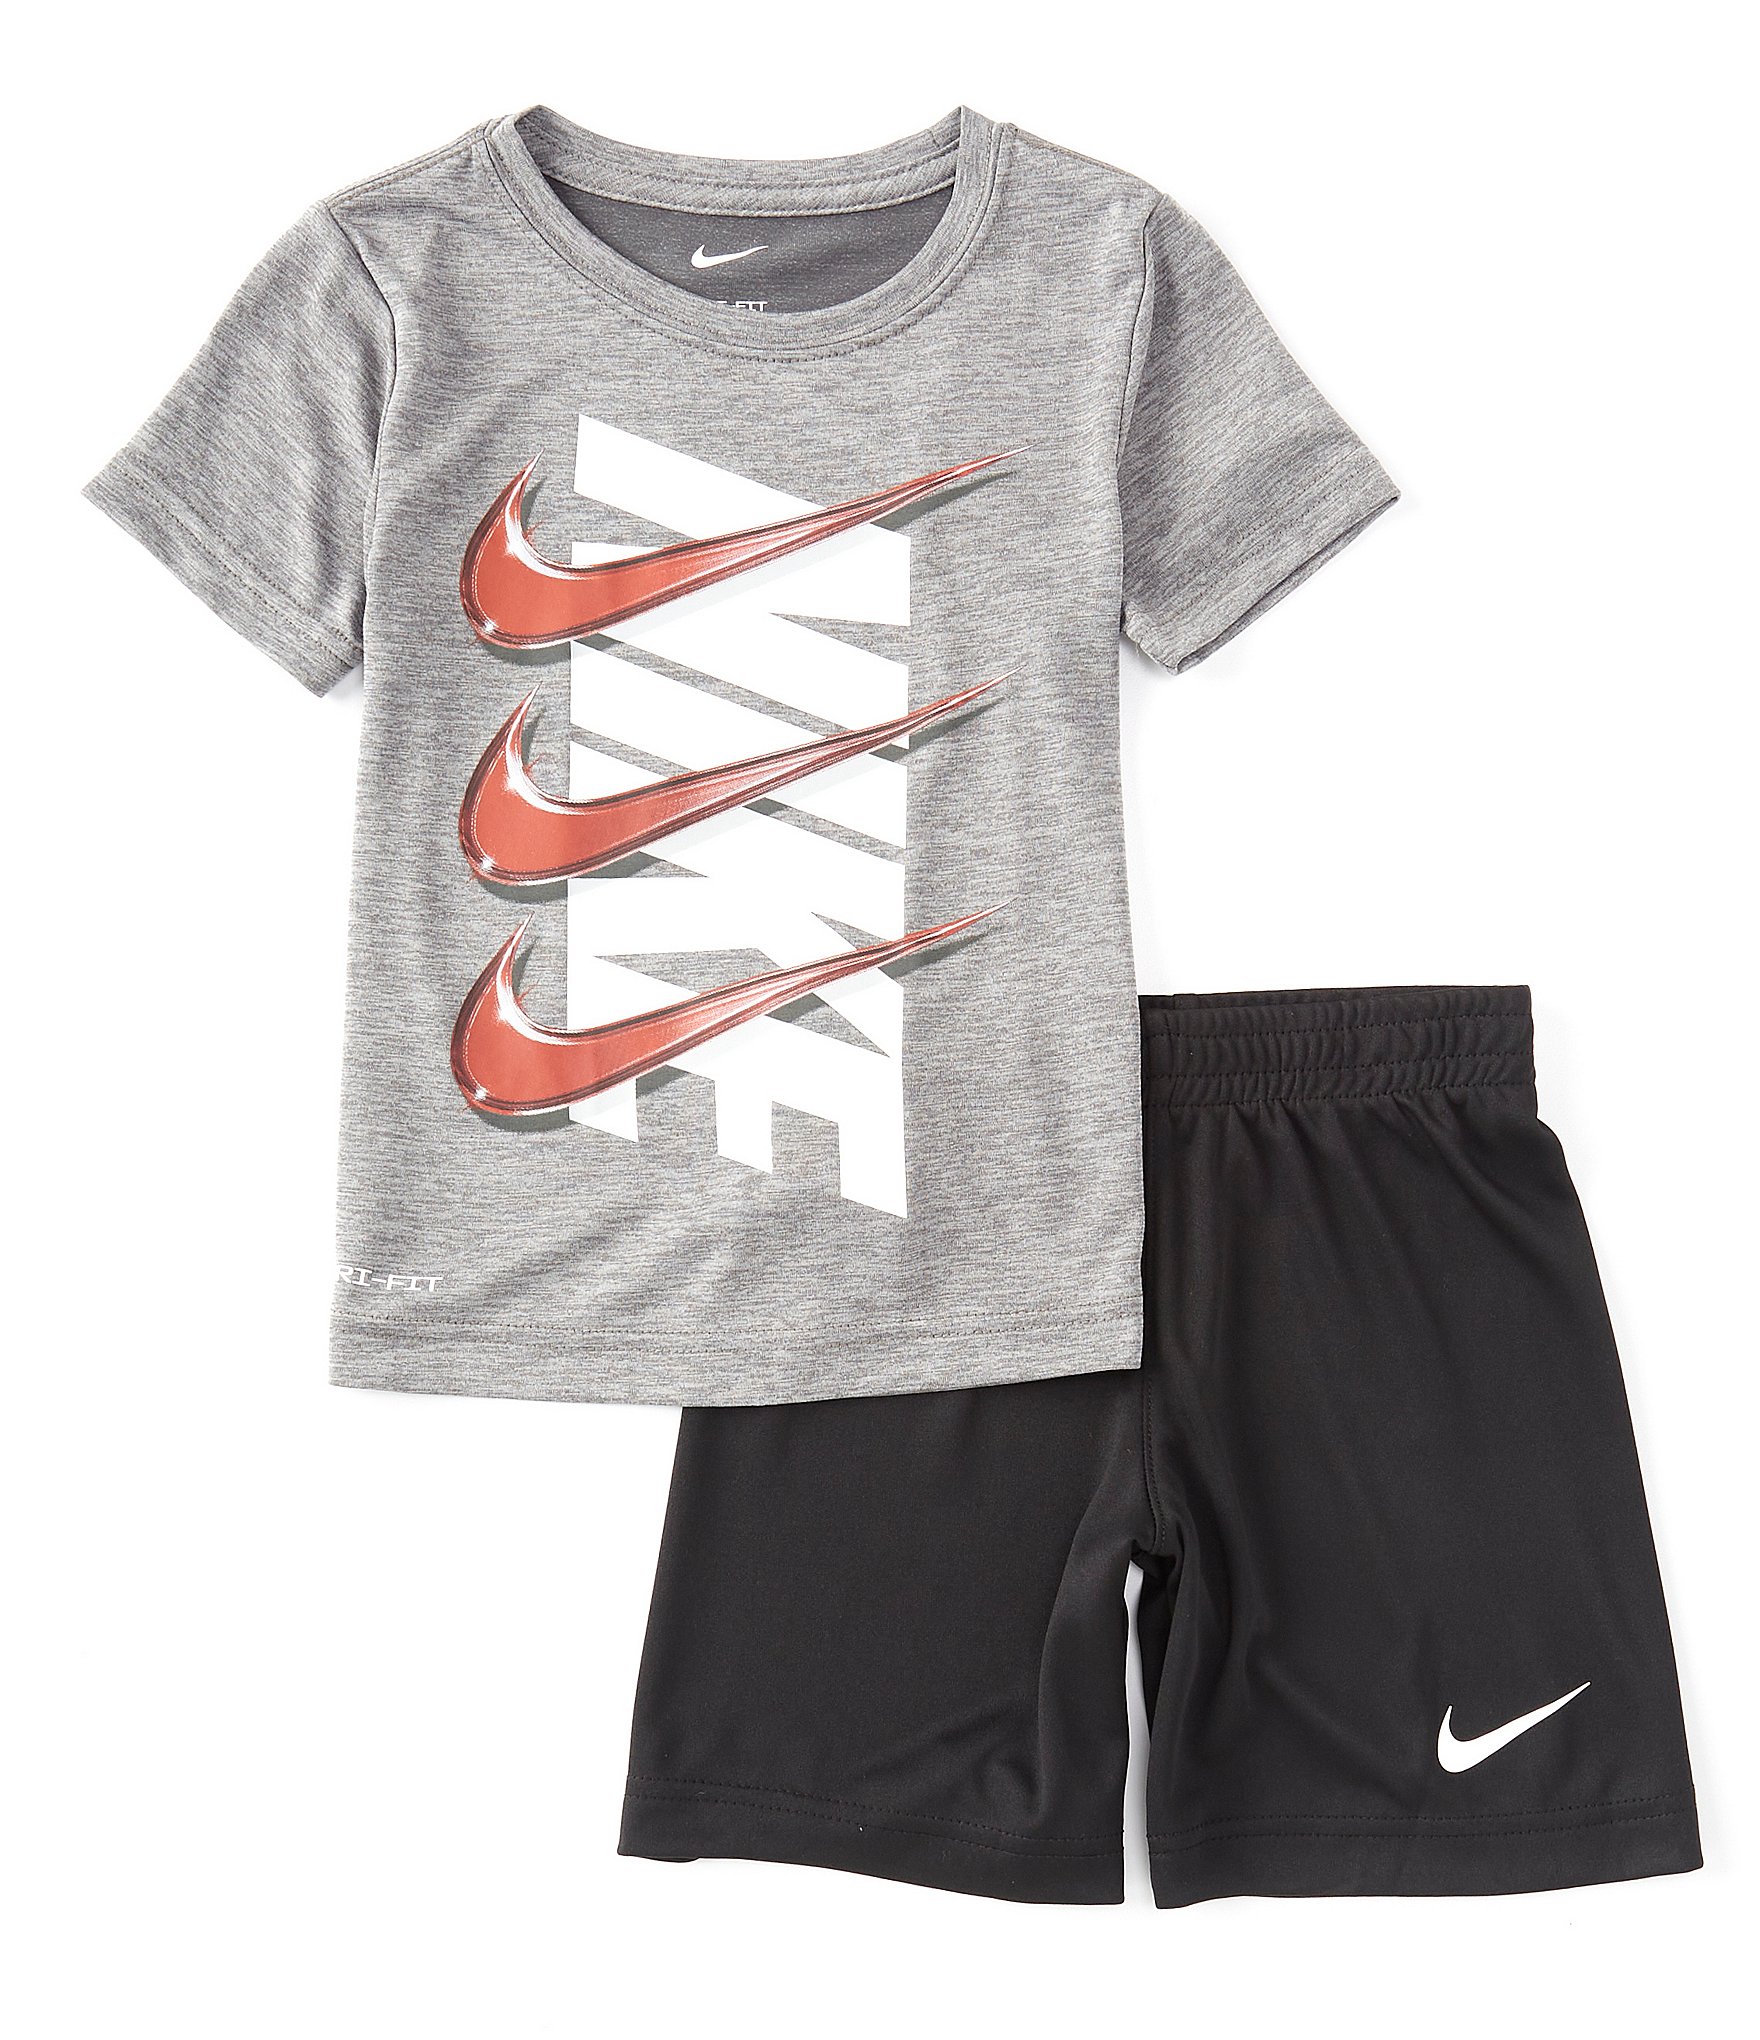 Buy Toddler Kid Basketball Jersey Outfit Baby Boy Girl Letters Tank Top +  Track Shorts Sets Boy Summer Clothes, Black, 4-5T at